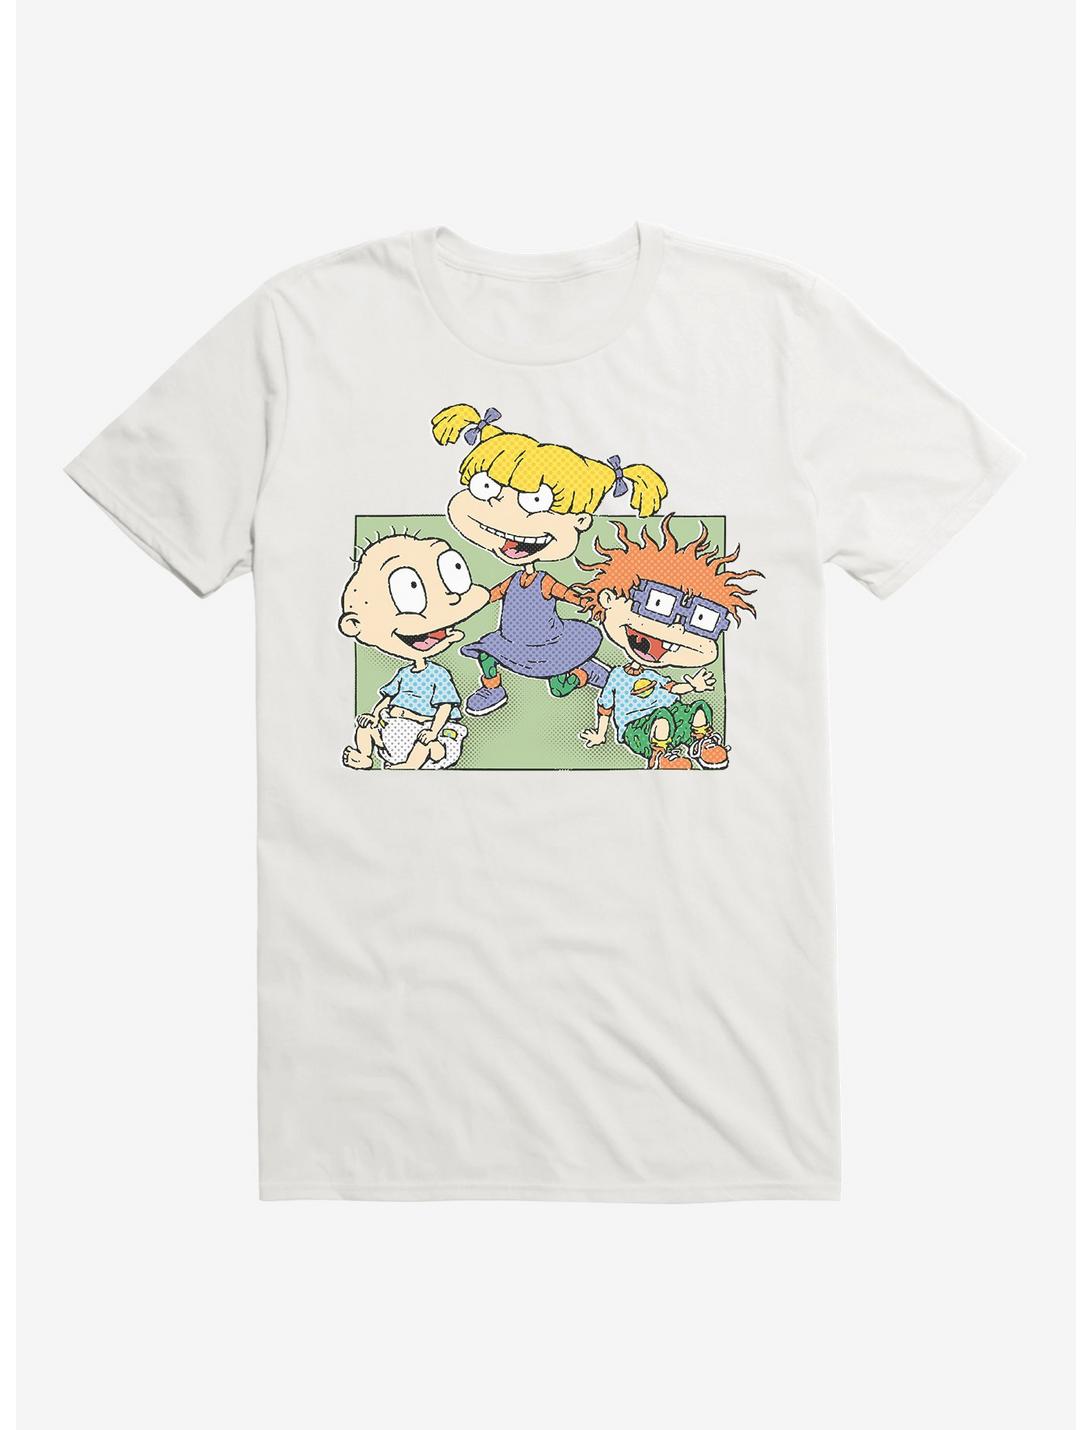 Rugrats Early Years T-Shirt, WHITE, hi-res